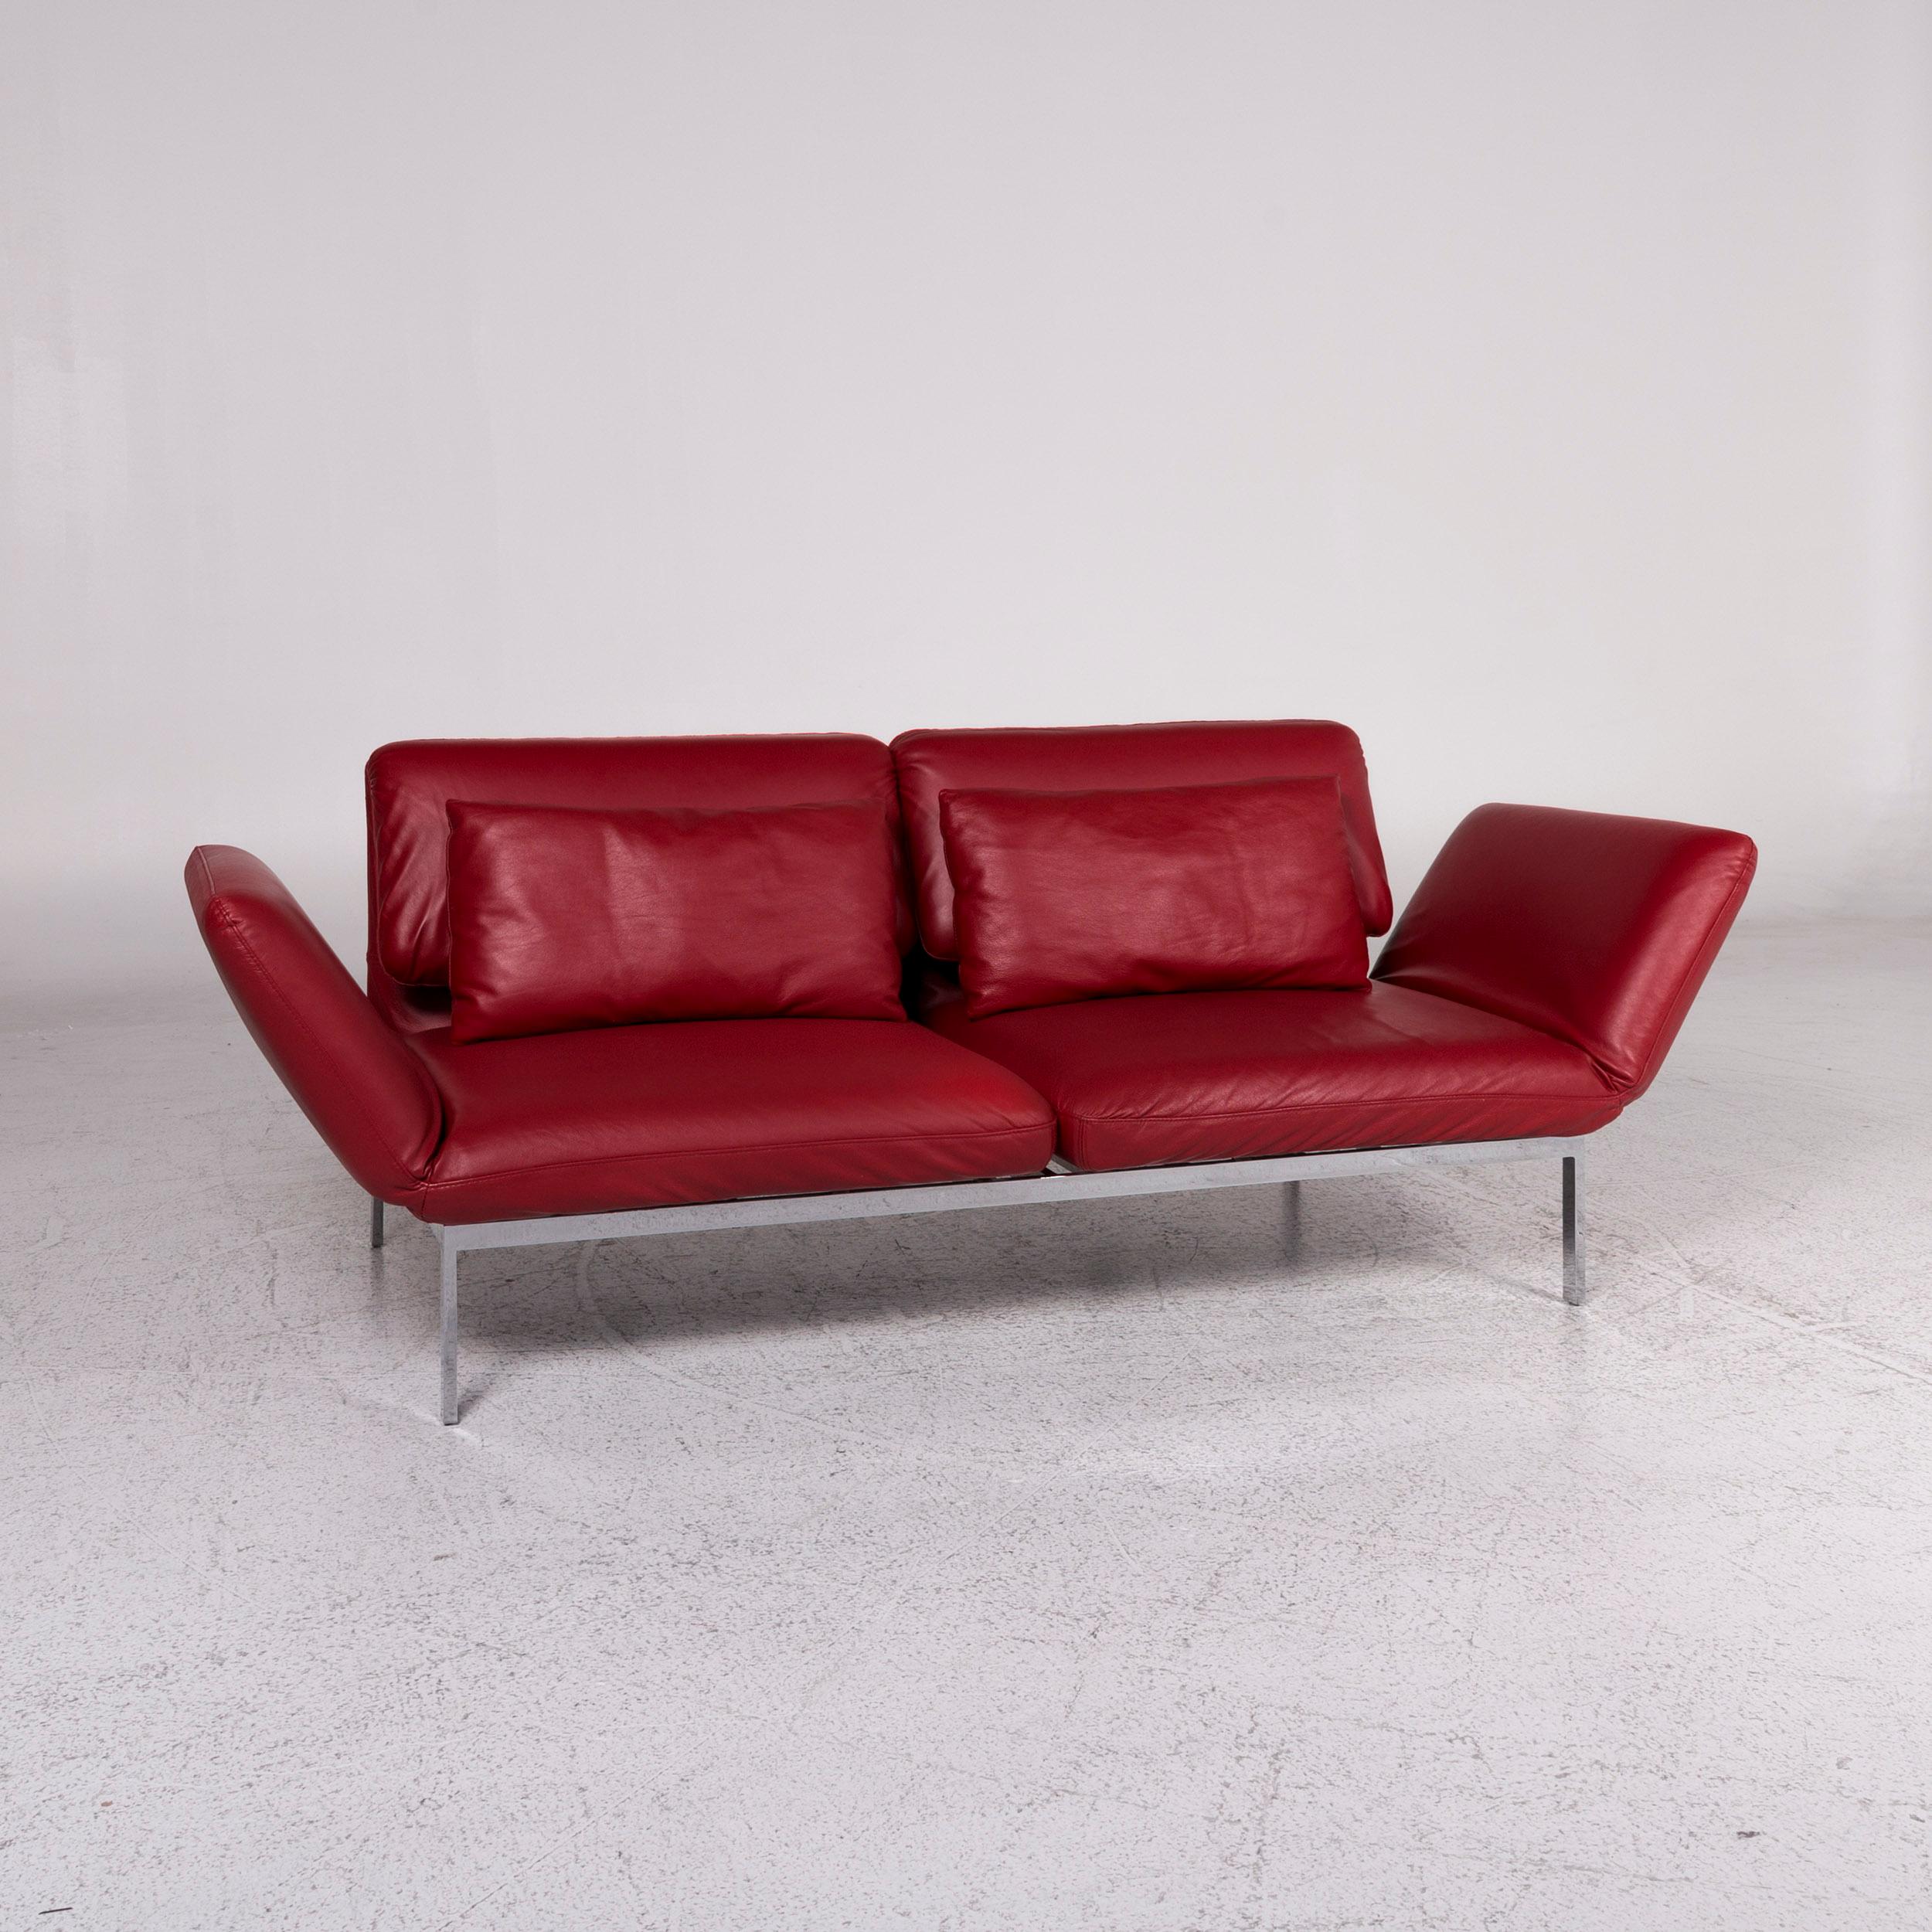 We bring to you a Brühl & Sippold Roro designer leather sofa red two-seat relax function couch.
 
Product measurements in centimetres:
 
Depth 86
Width 183
Height 77
Seat-height 38
Rest-height 35
Seat-depth 100
Seat-width 145
Back-height